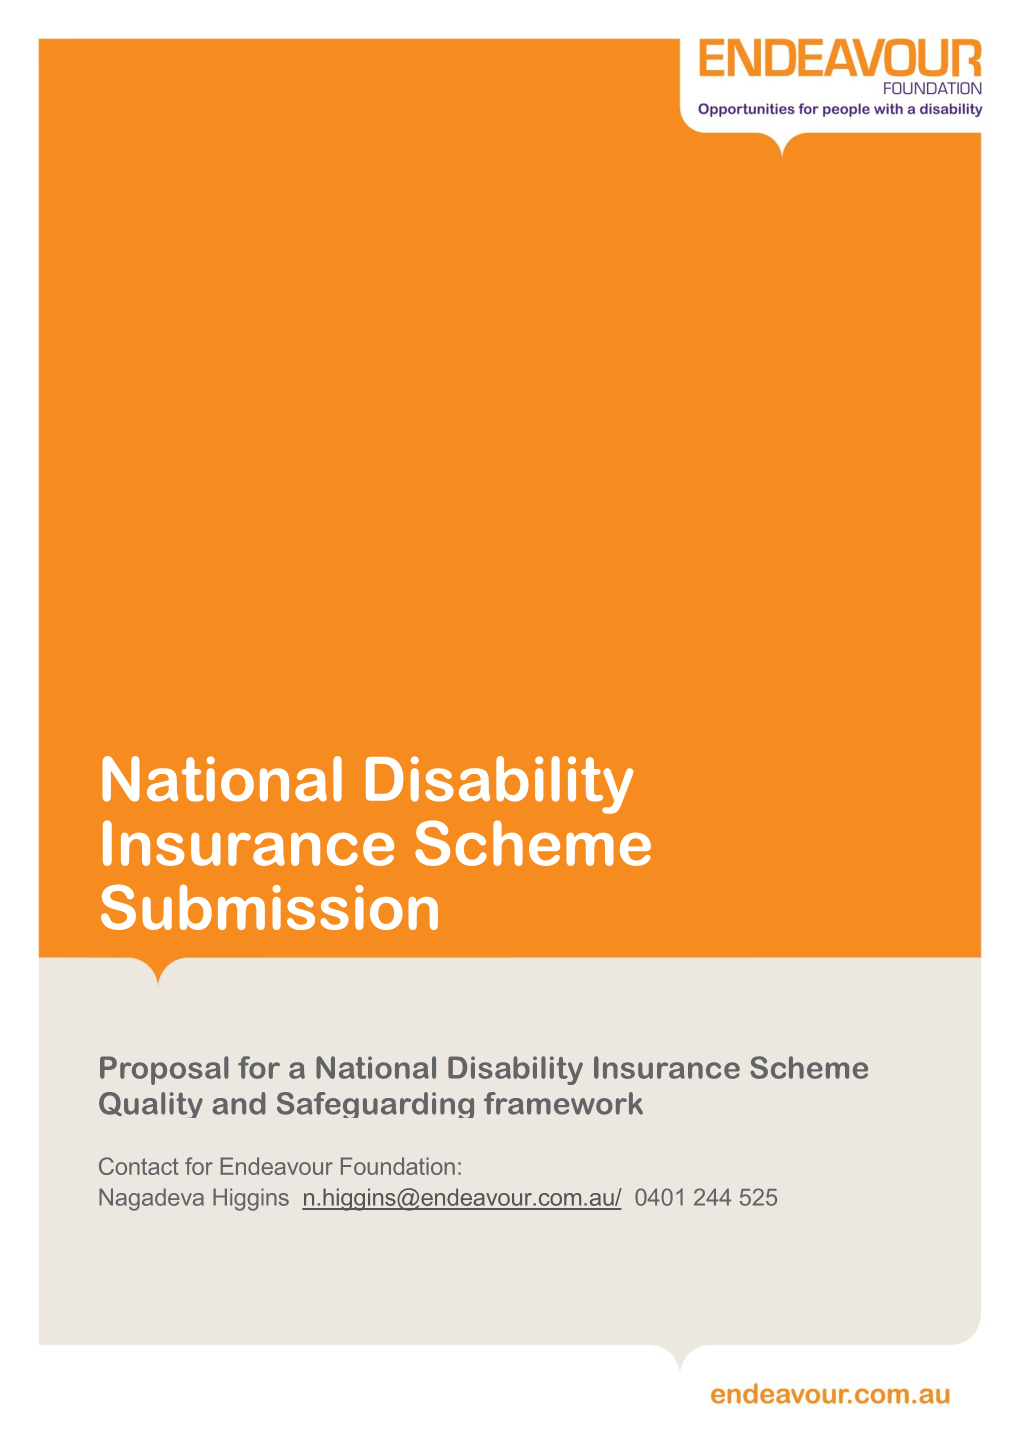 National Disability Insurance Scheme Submission